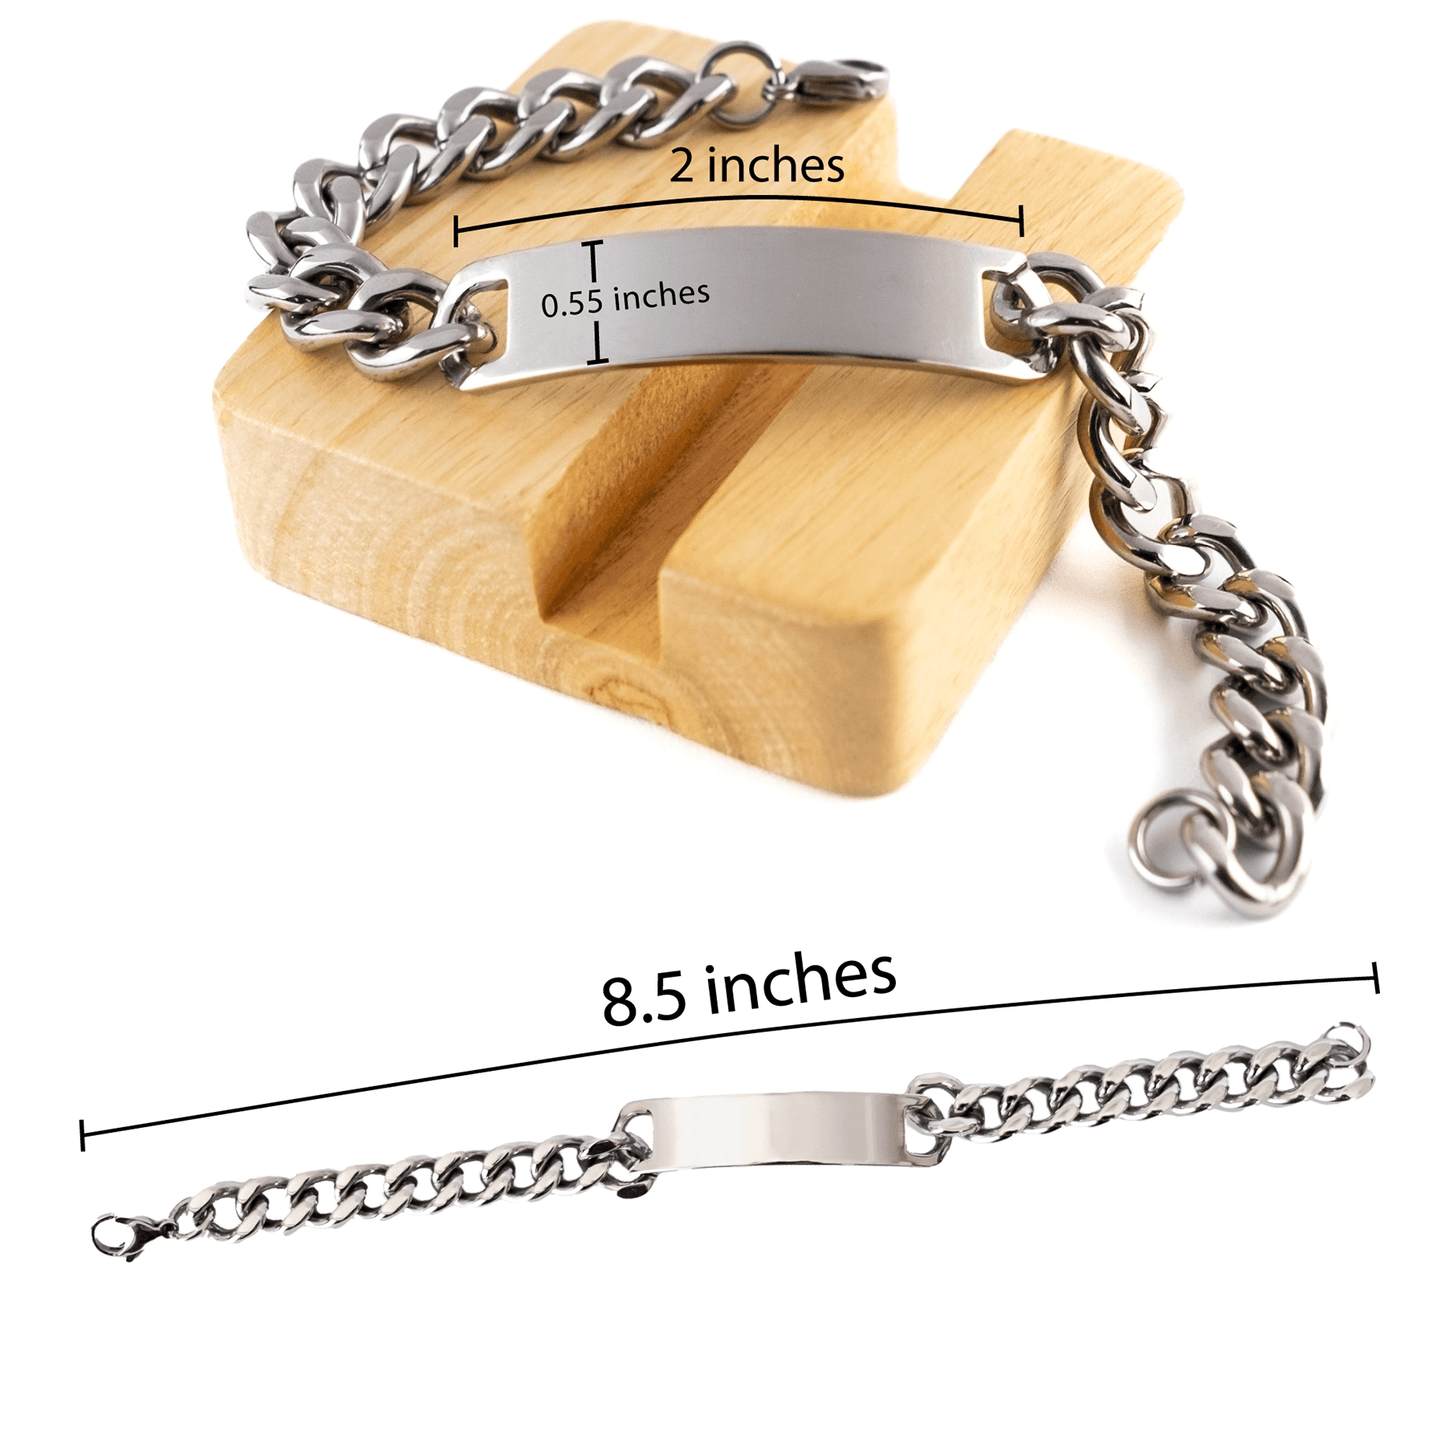 Remarkable Yoga Instructor Gifts, Your dedication and hard work, Inspirational Birthday Christmas Unique Cuban Chain Stainless Steel Bracelet For Yoga Instructor, Coworkers, Men, Women, Friends - Mallard Moon Gift Shop